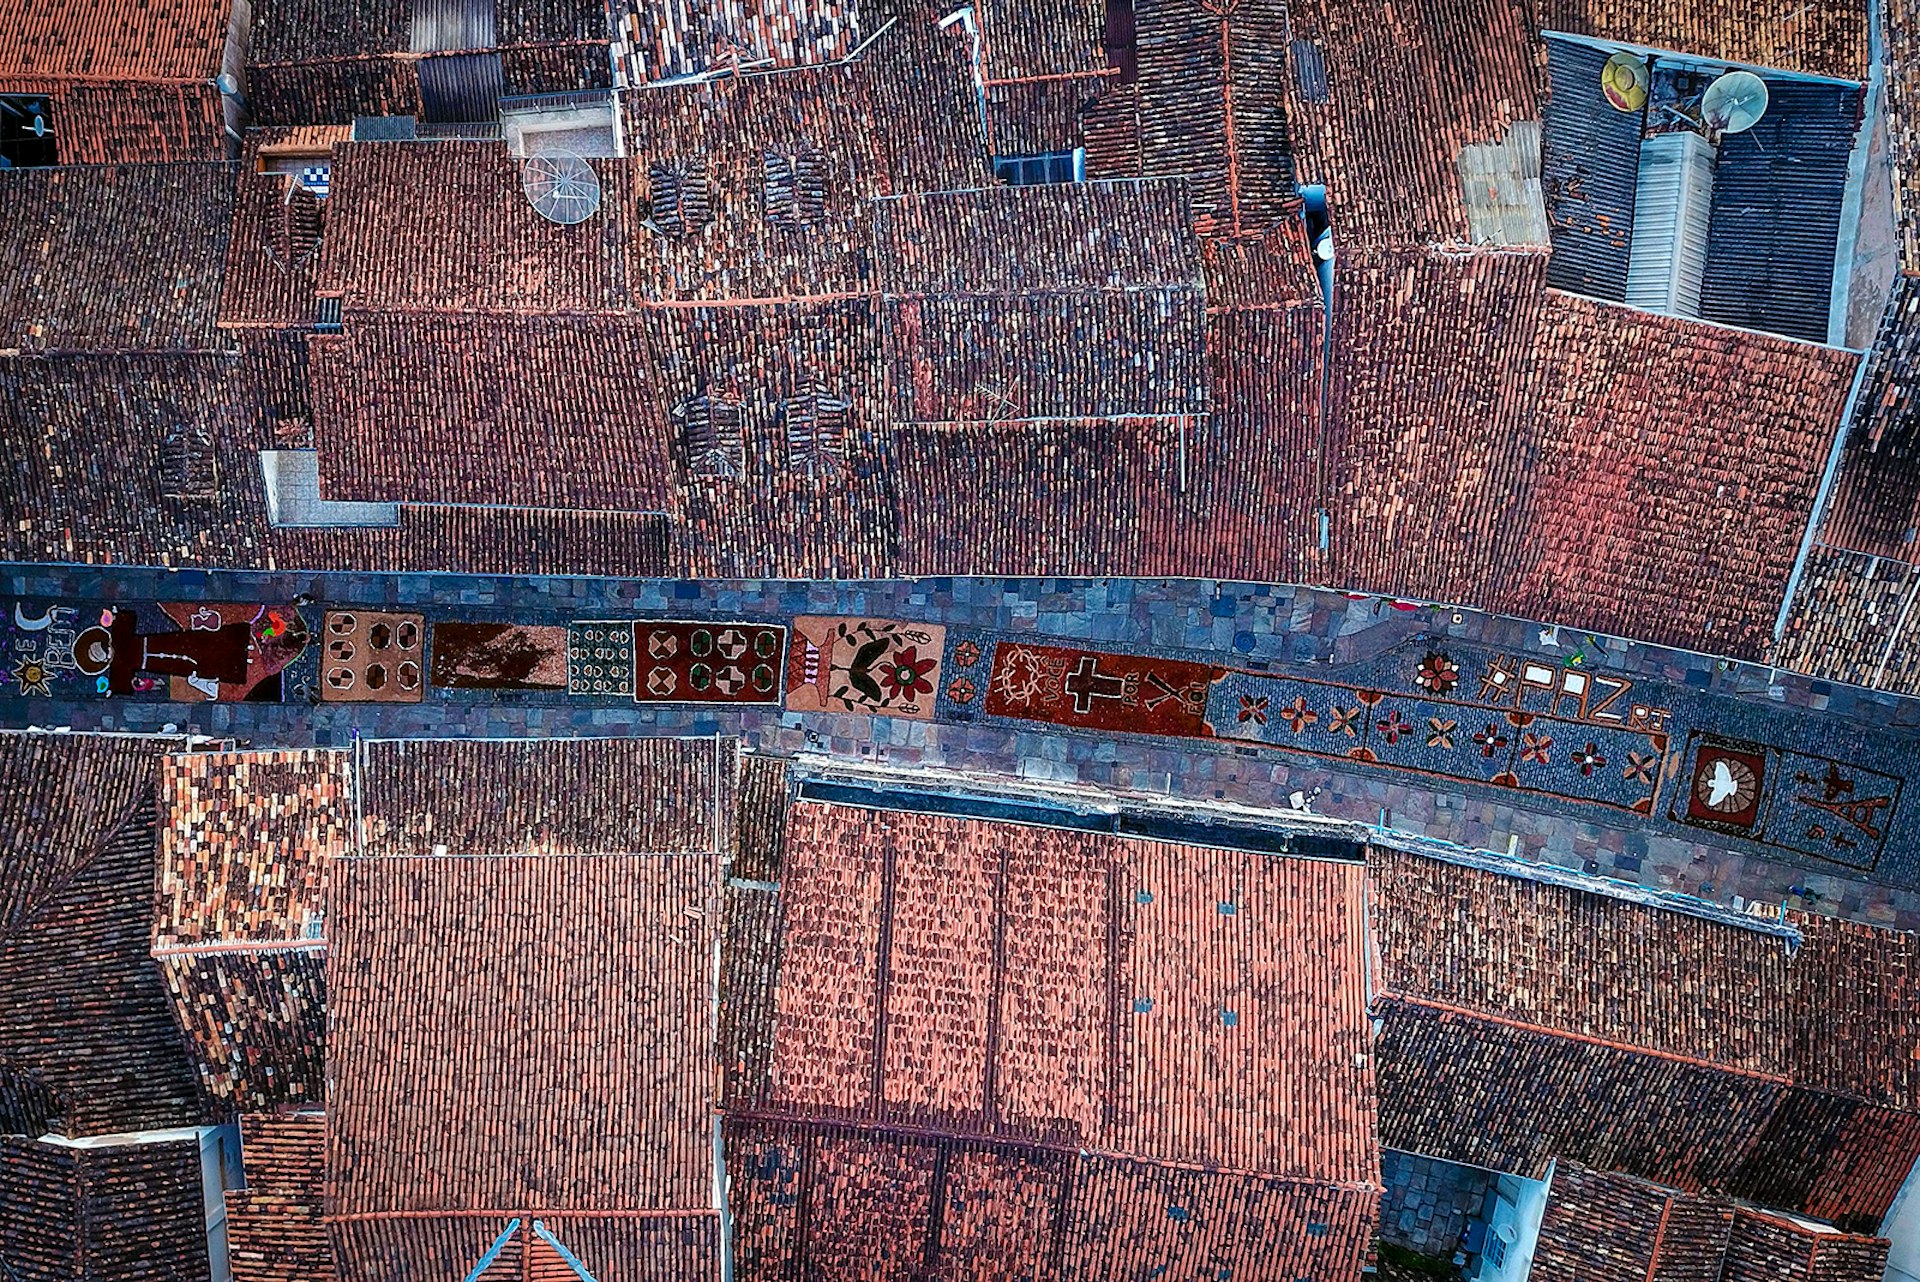 Aerial picture showing sawdust rugs, seen between tiled rooftops, decorating a street in the historic city of Ouro Preto in Brazil during Easter   